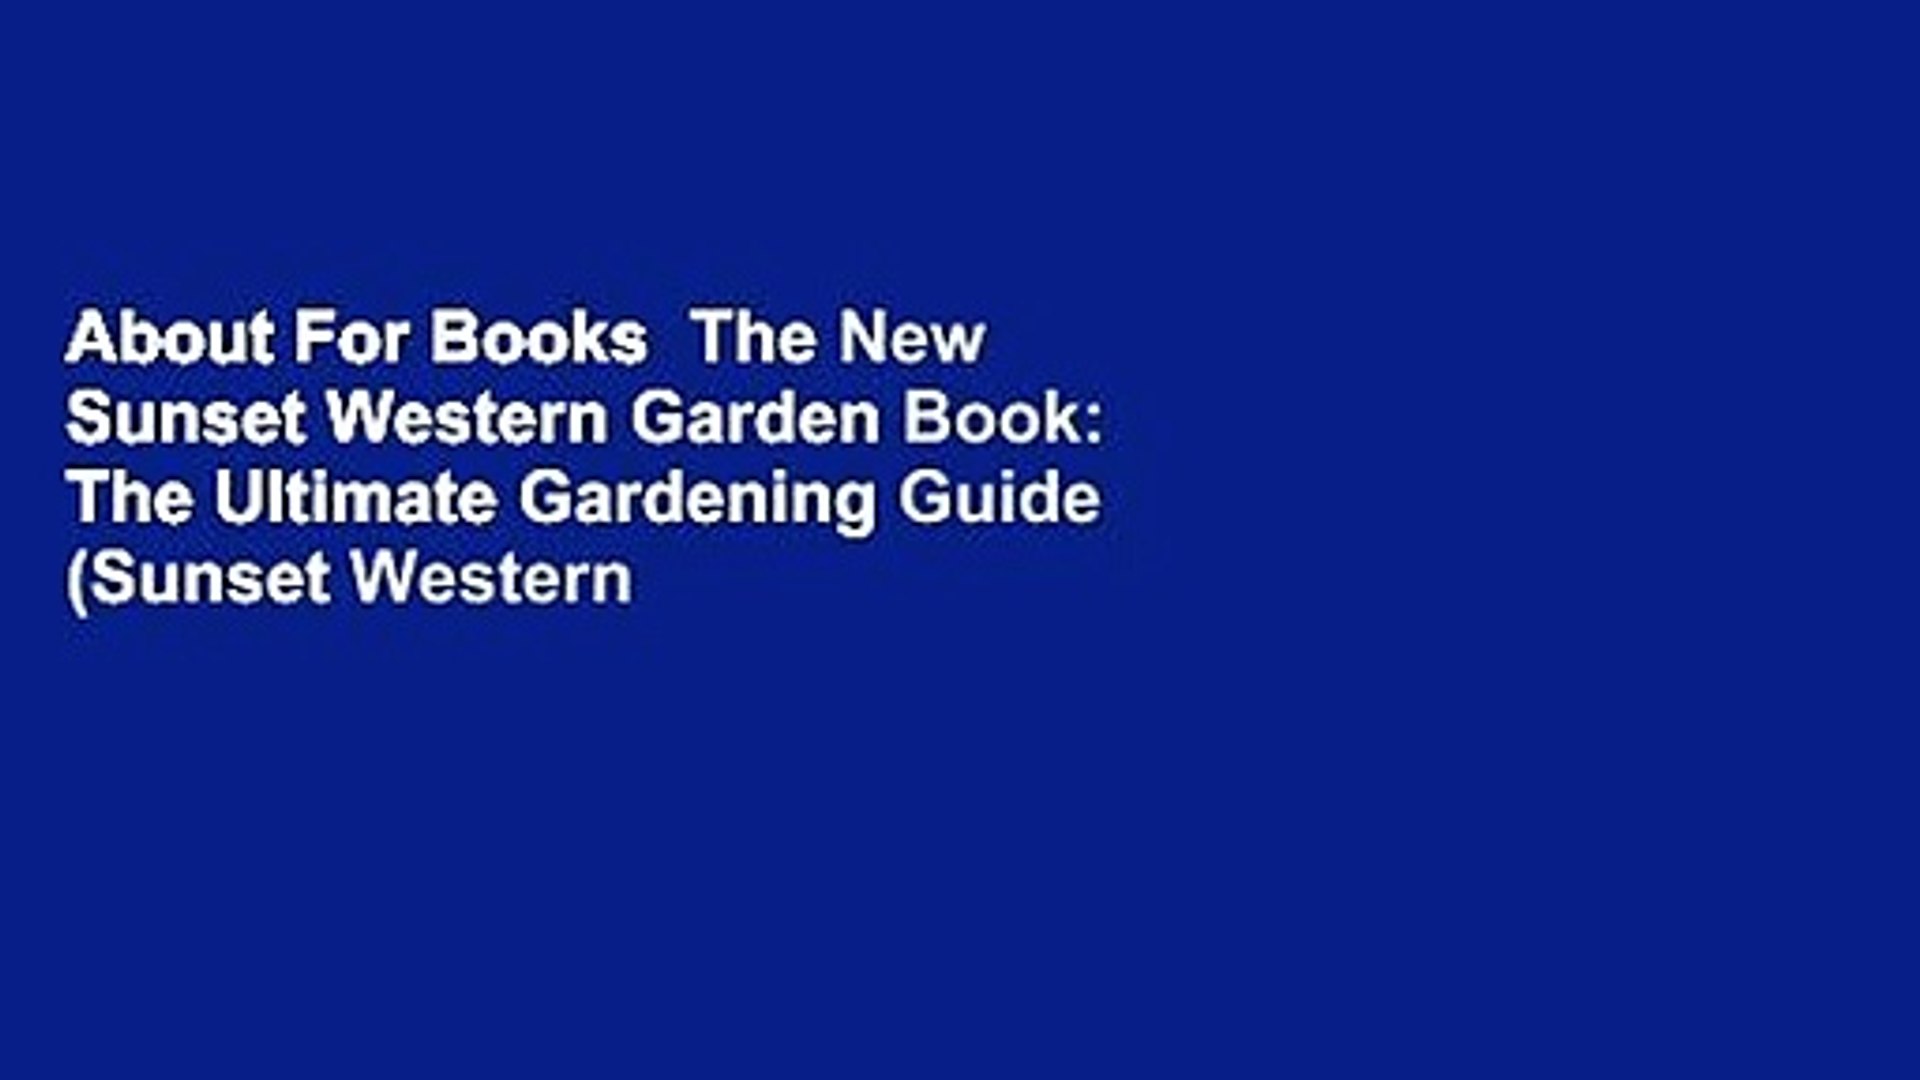 About For Books The New Sunset Western Garden Book The Ultimate